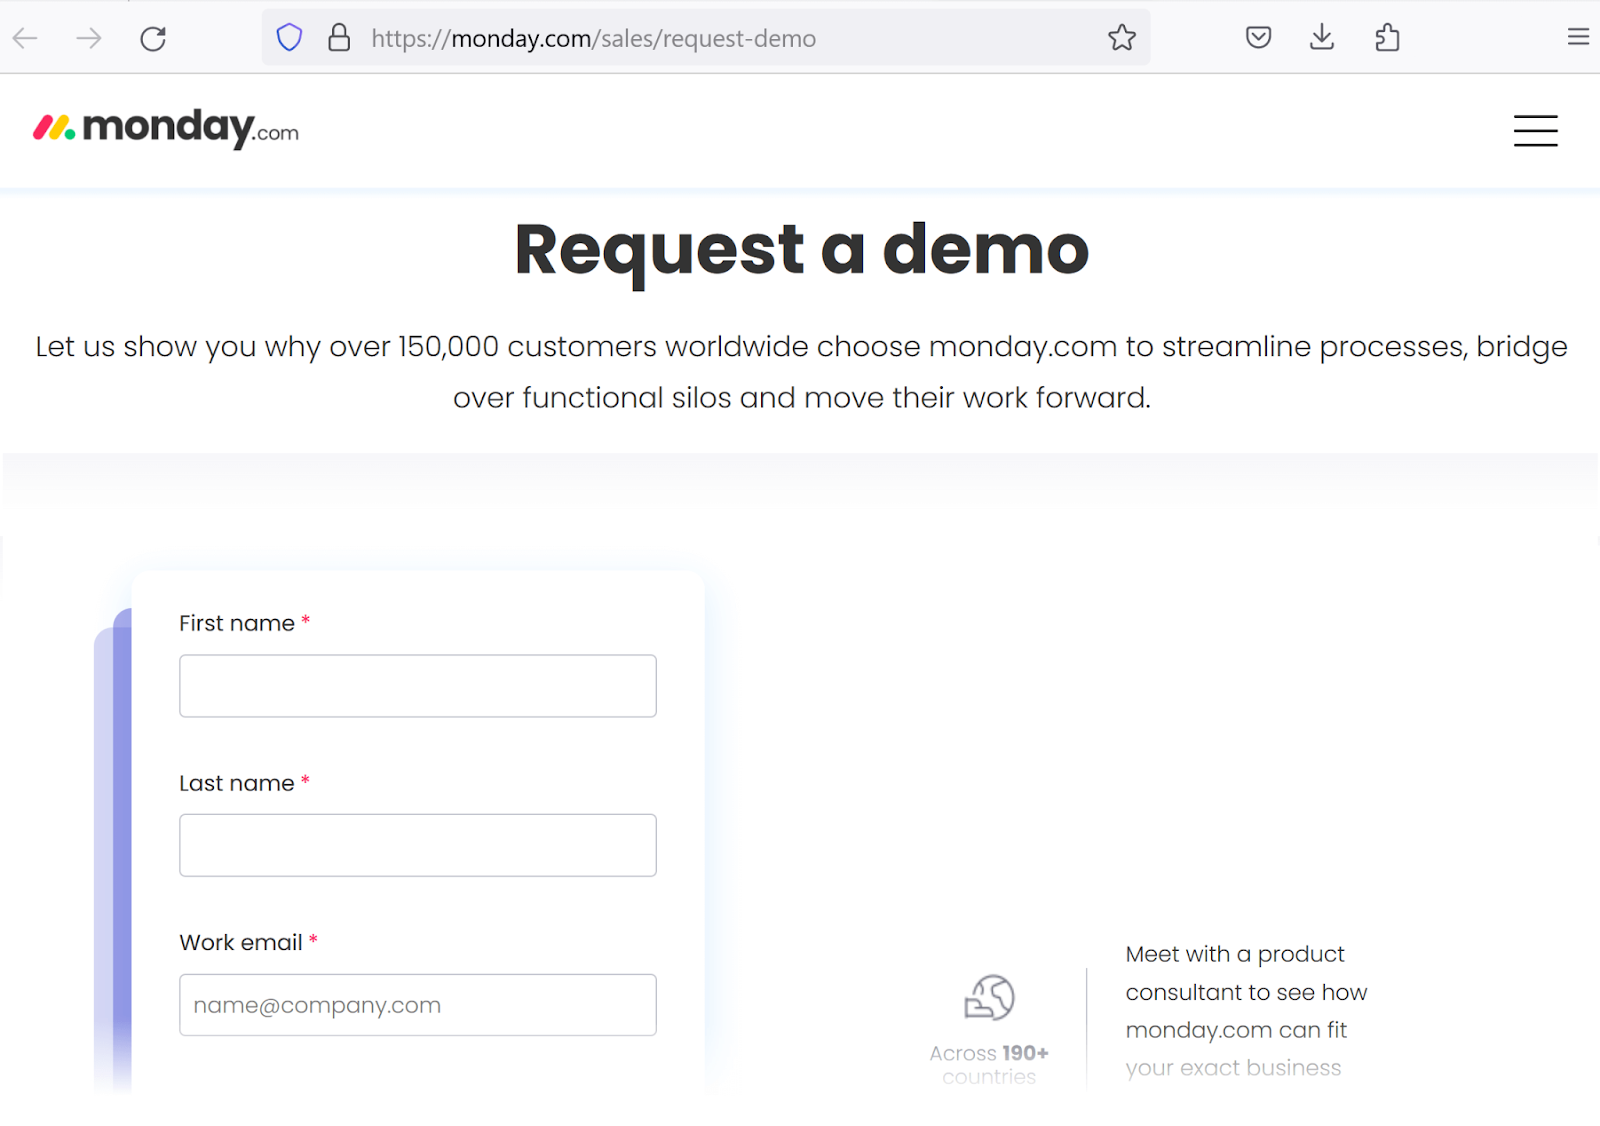 "Request a demo" page on Monday.com